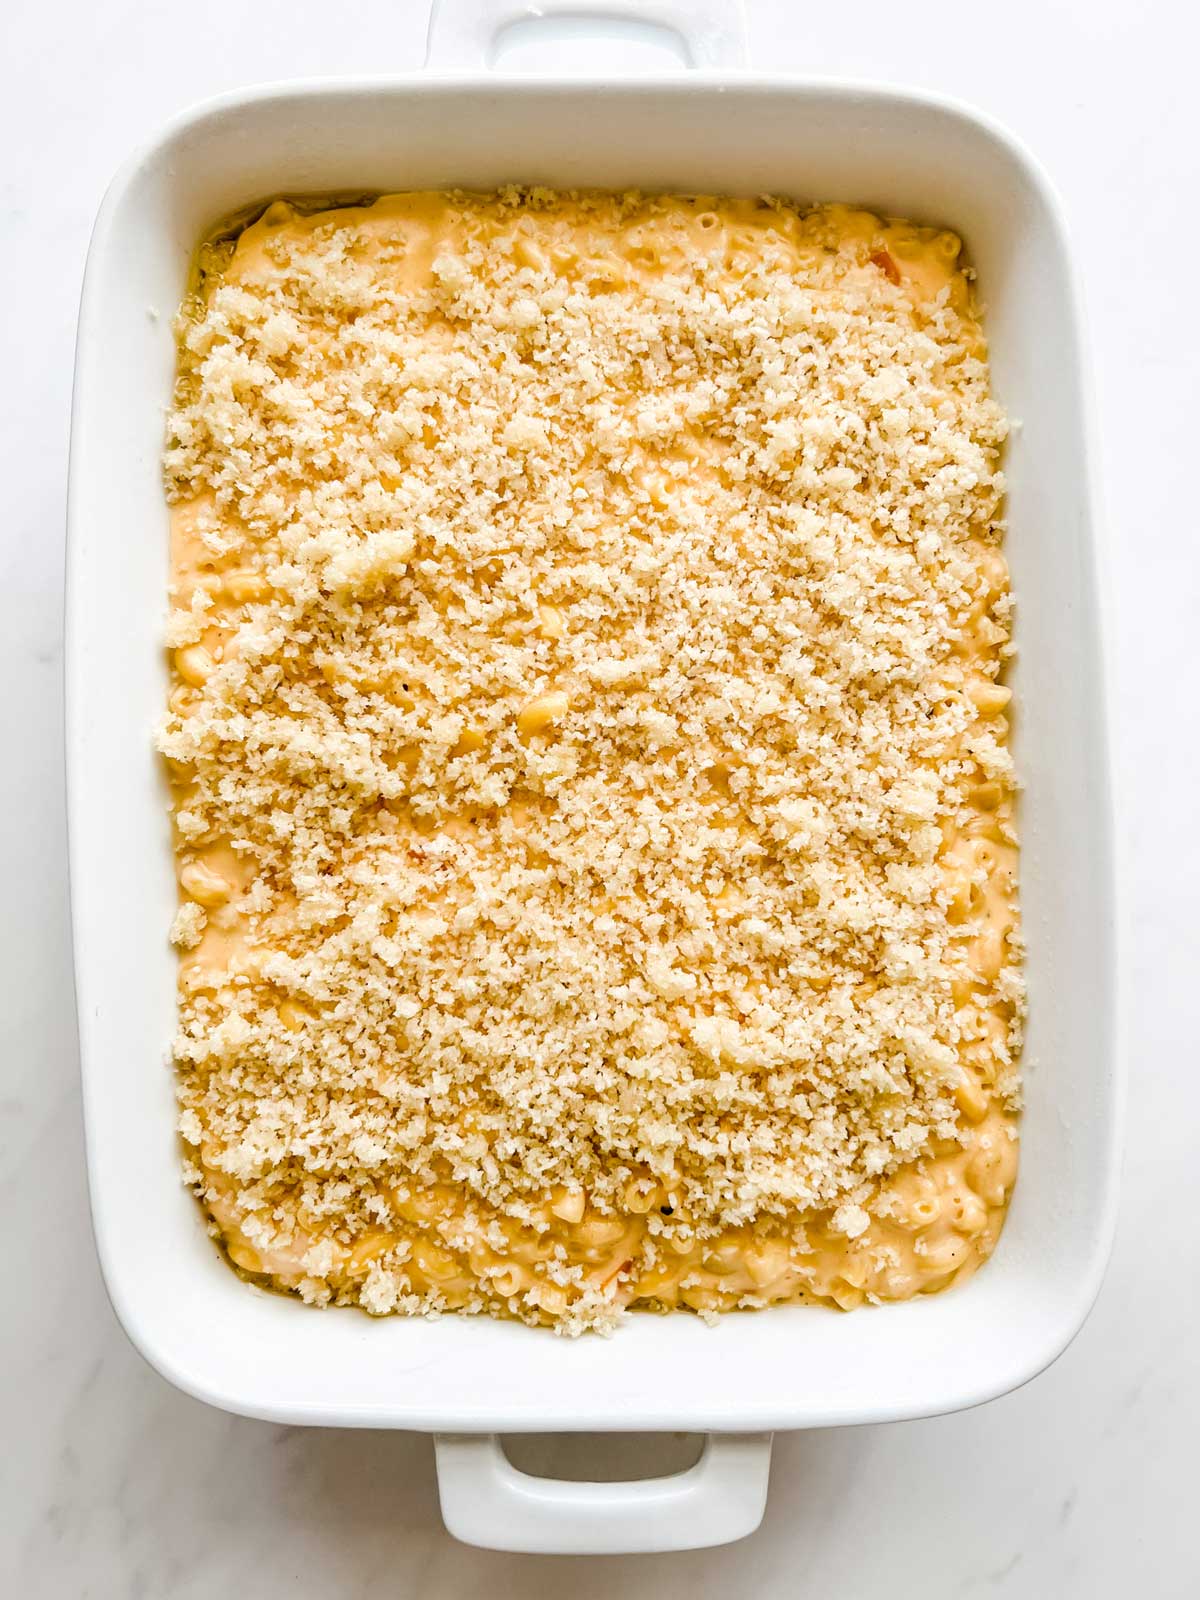 Macaroni and cheese with breadcrumbs on top in a casserole dish.